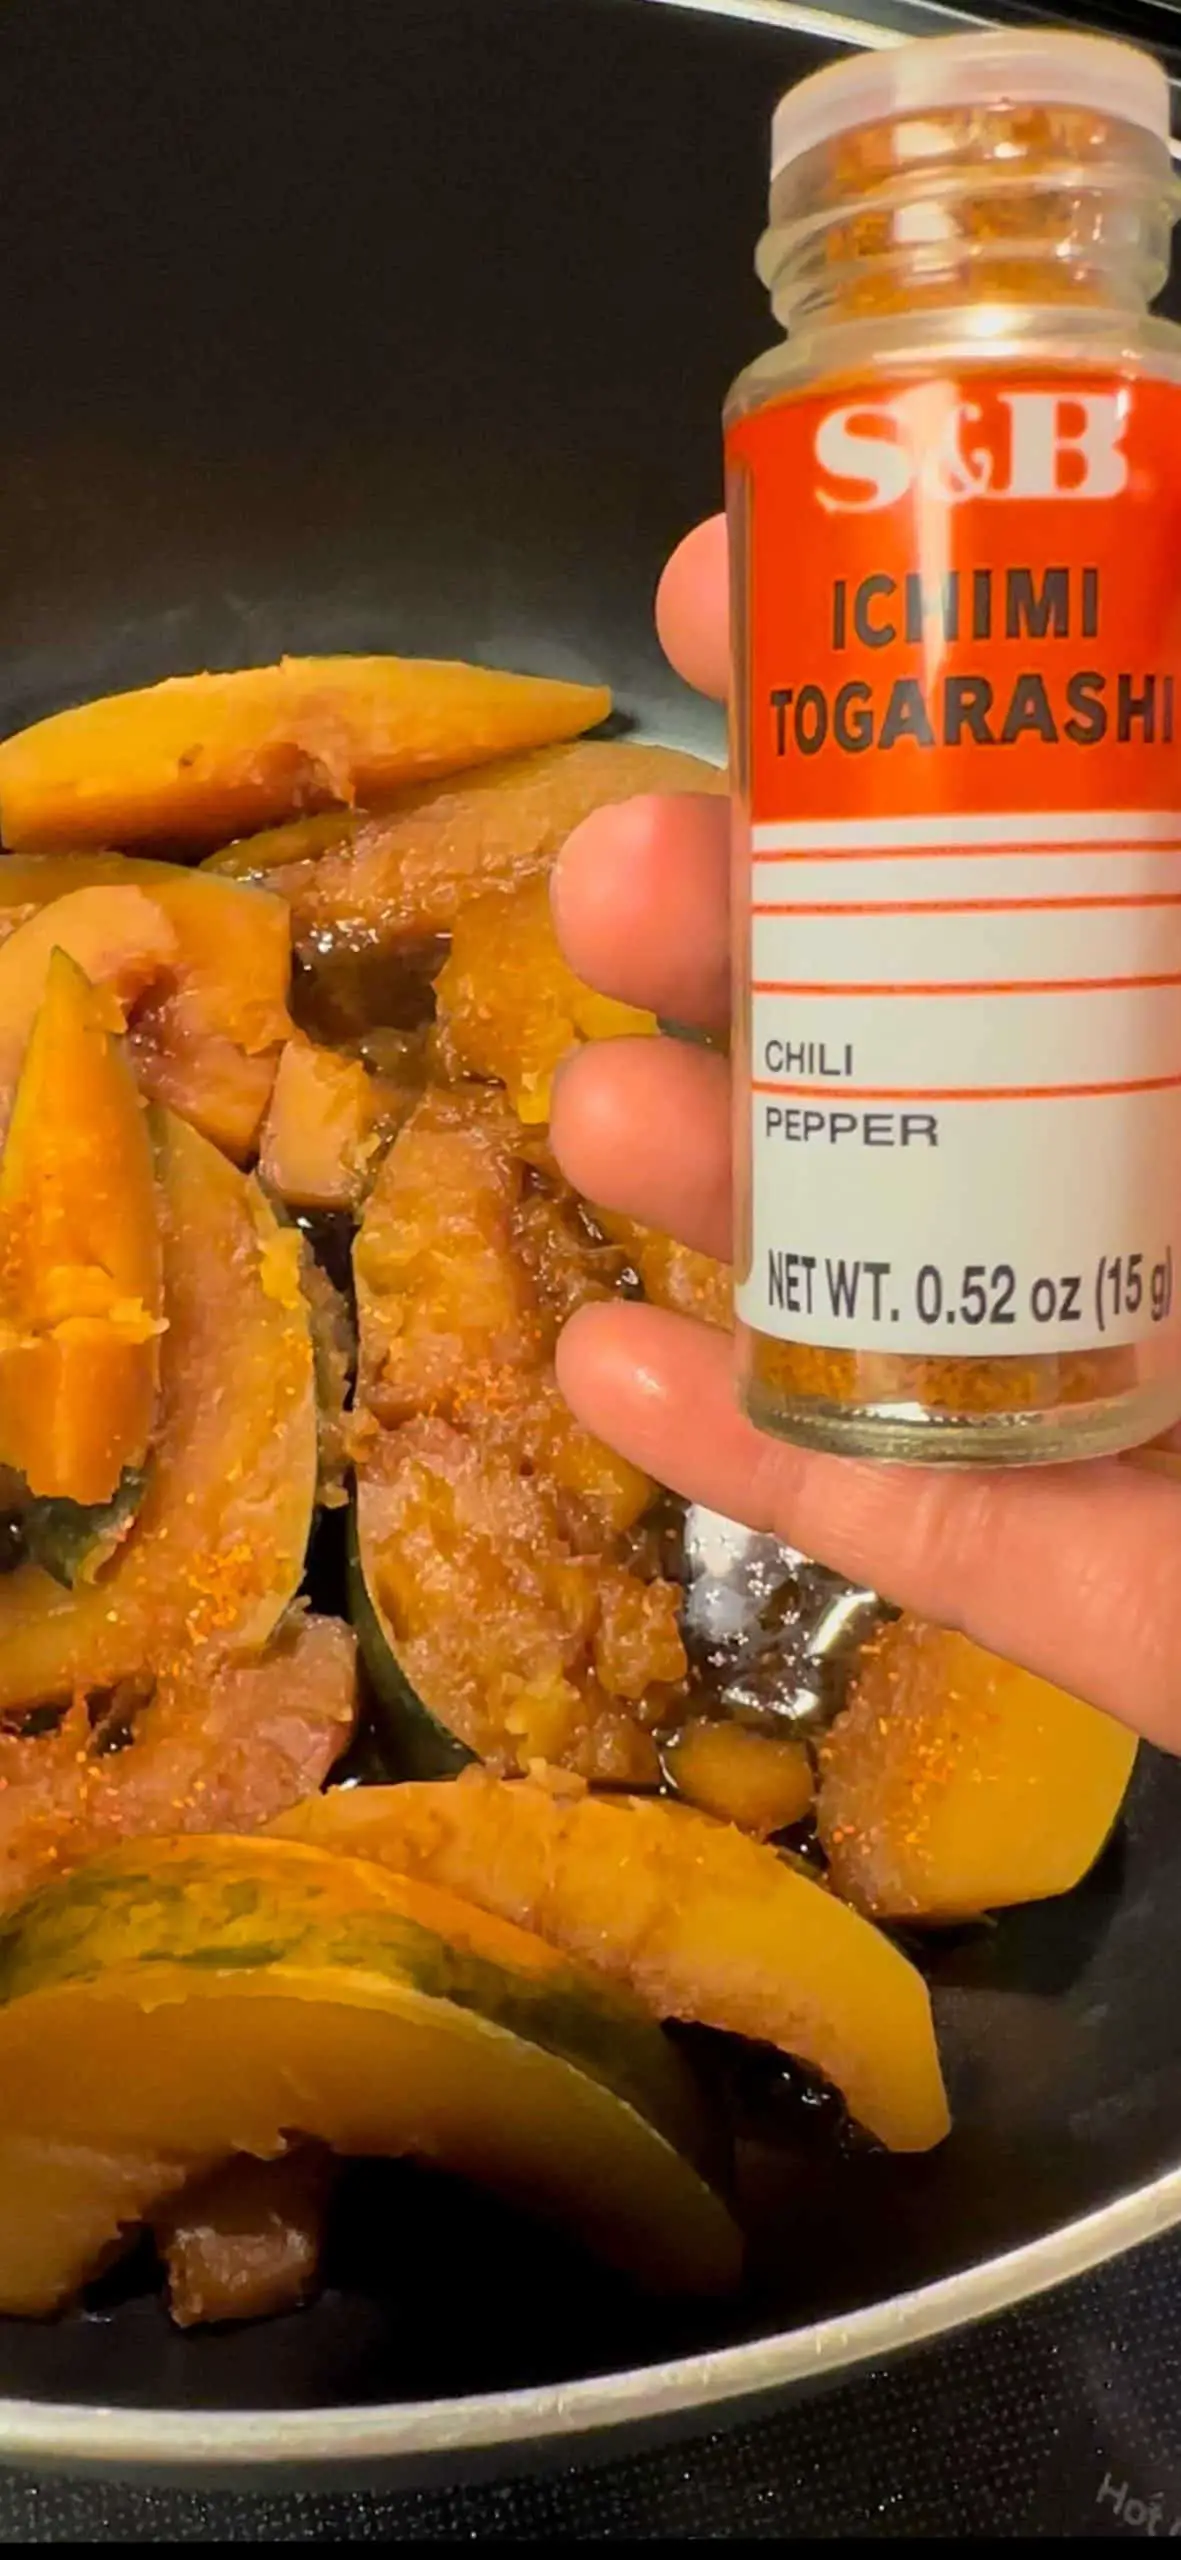 Cooked wedges of acorn squash in a soy braising liquid and a hand holding a bottle of Ichimi Togarashi in the foreground.